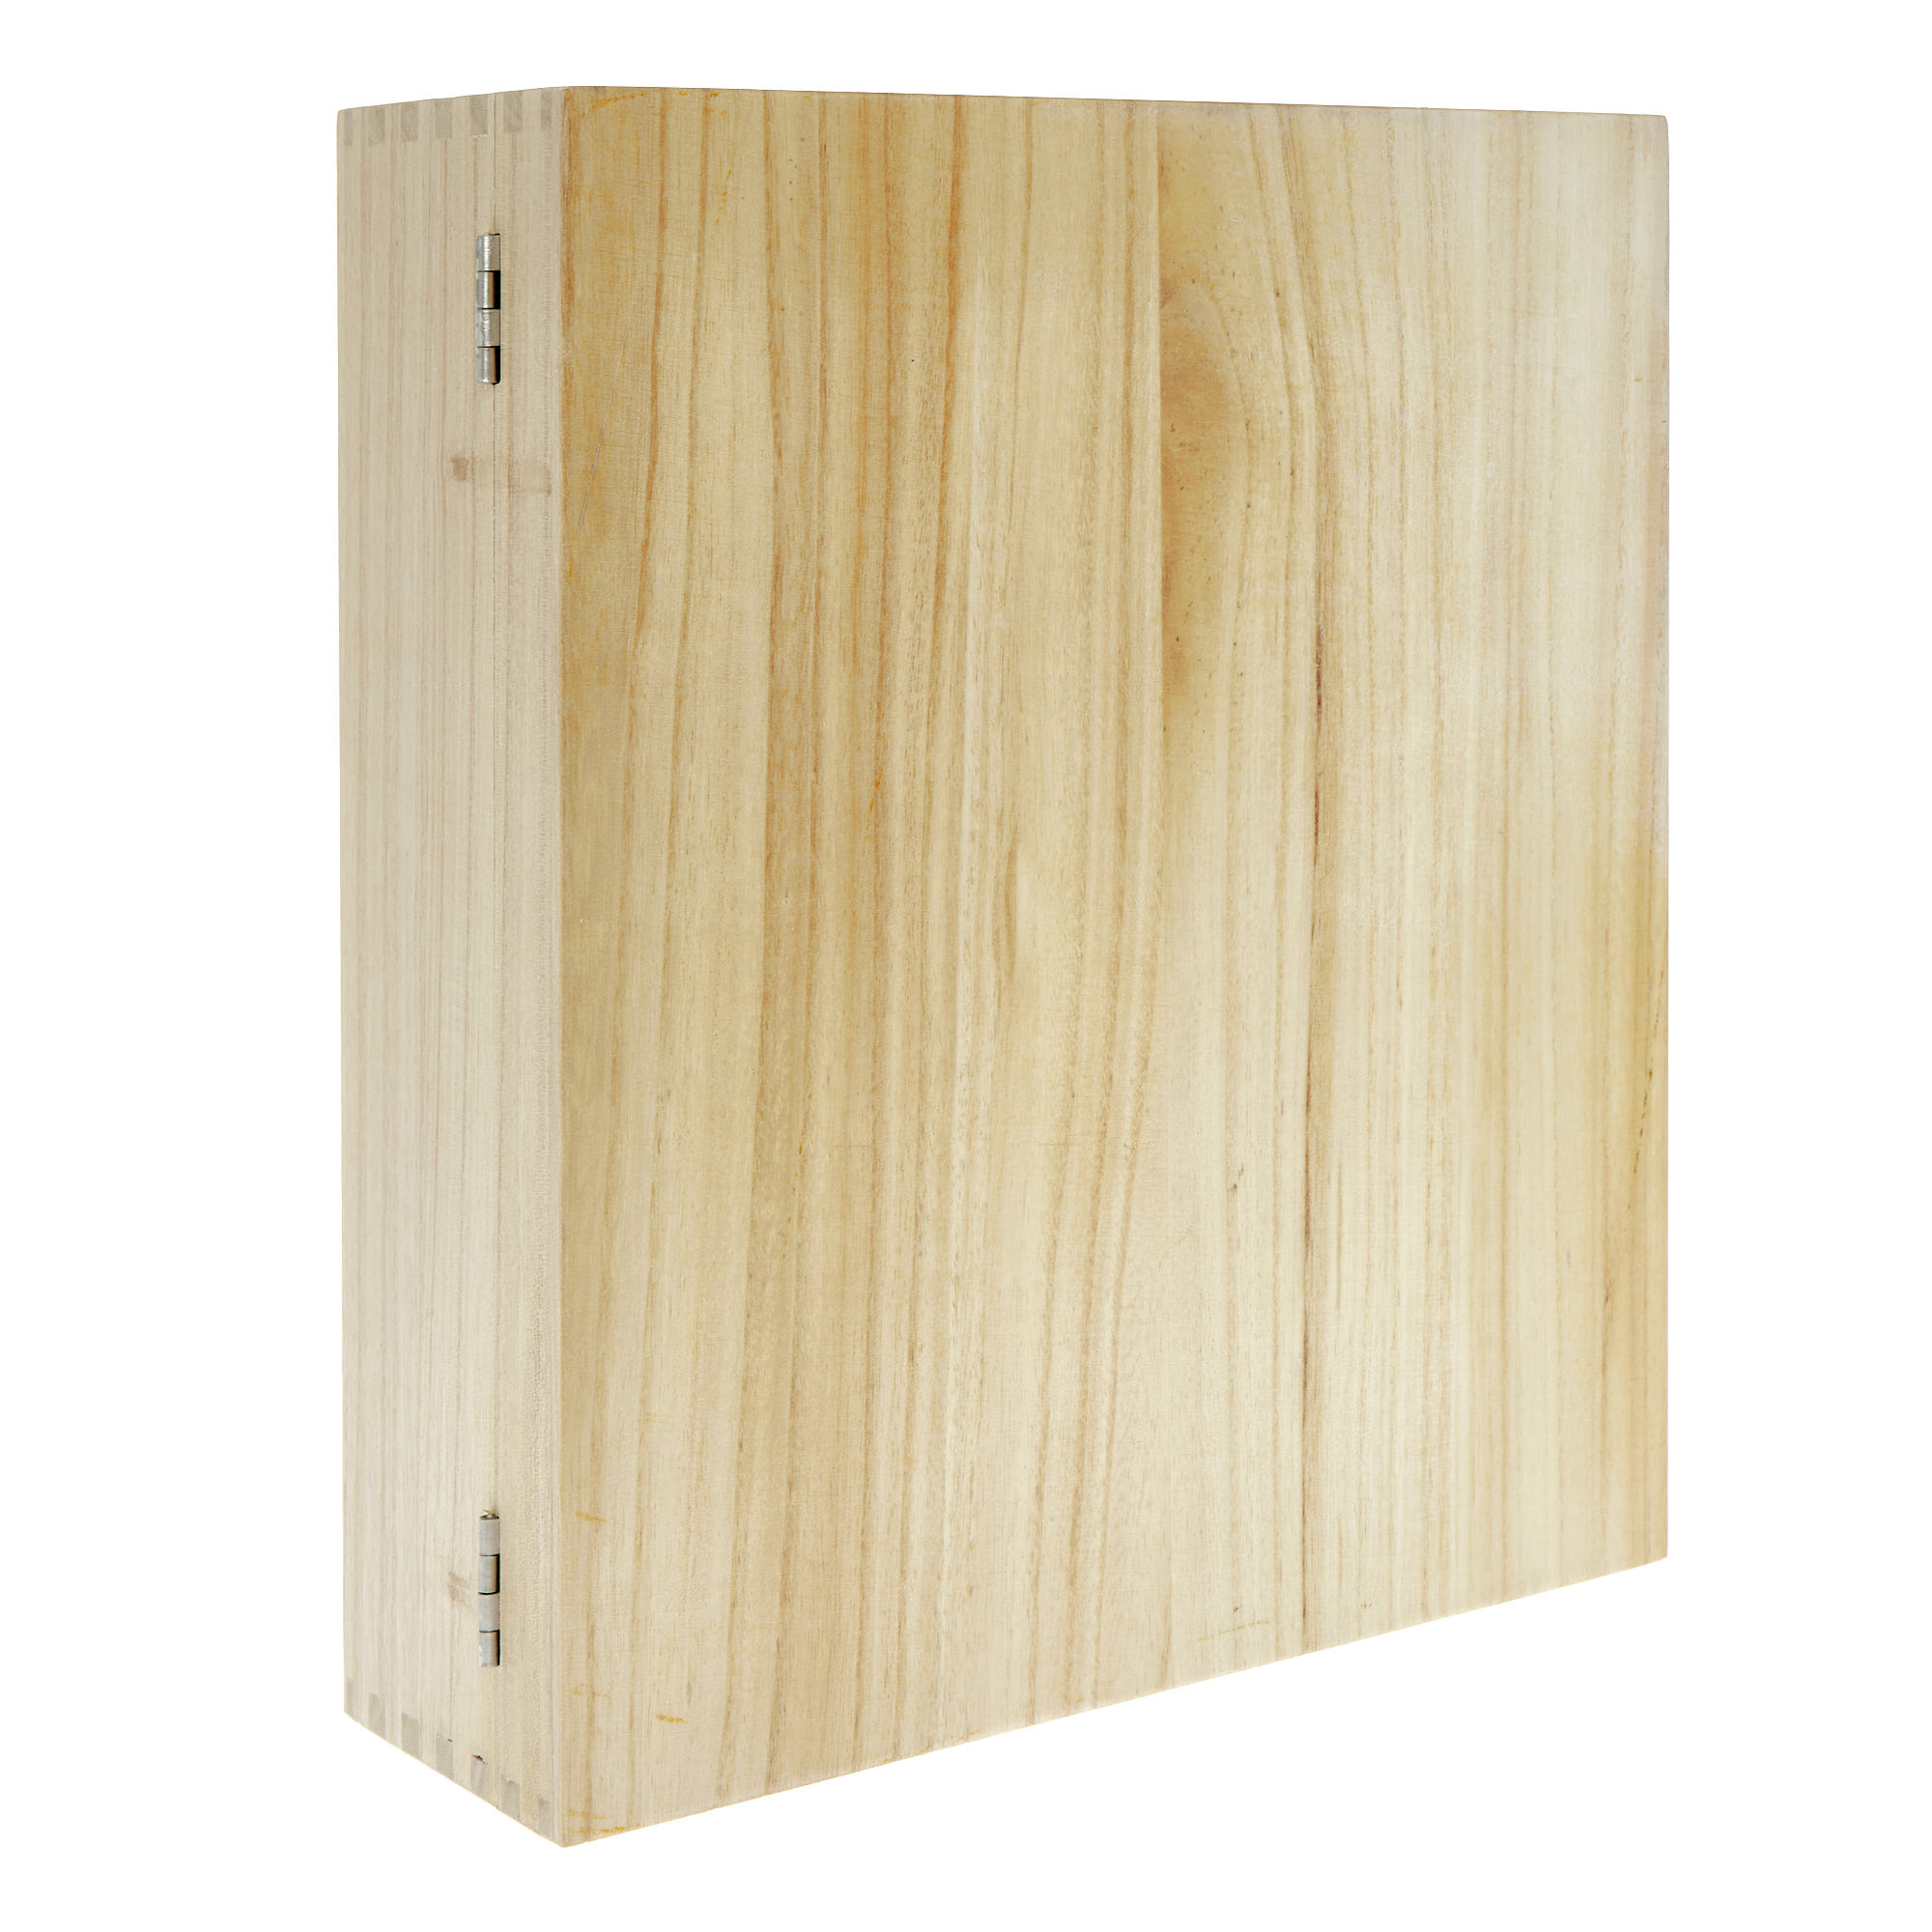 Buy Blank Natural Wooden Gift Box for GBP 7.99 | Card Factory UK